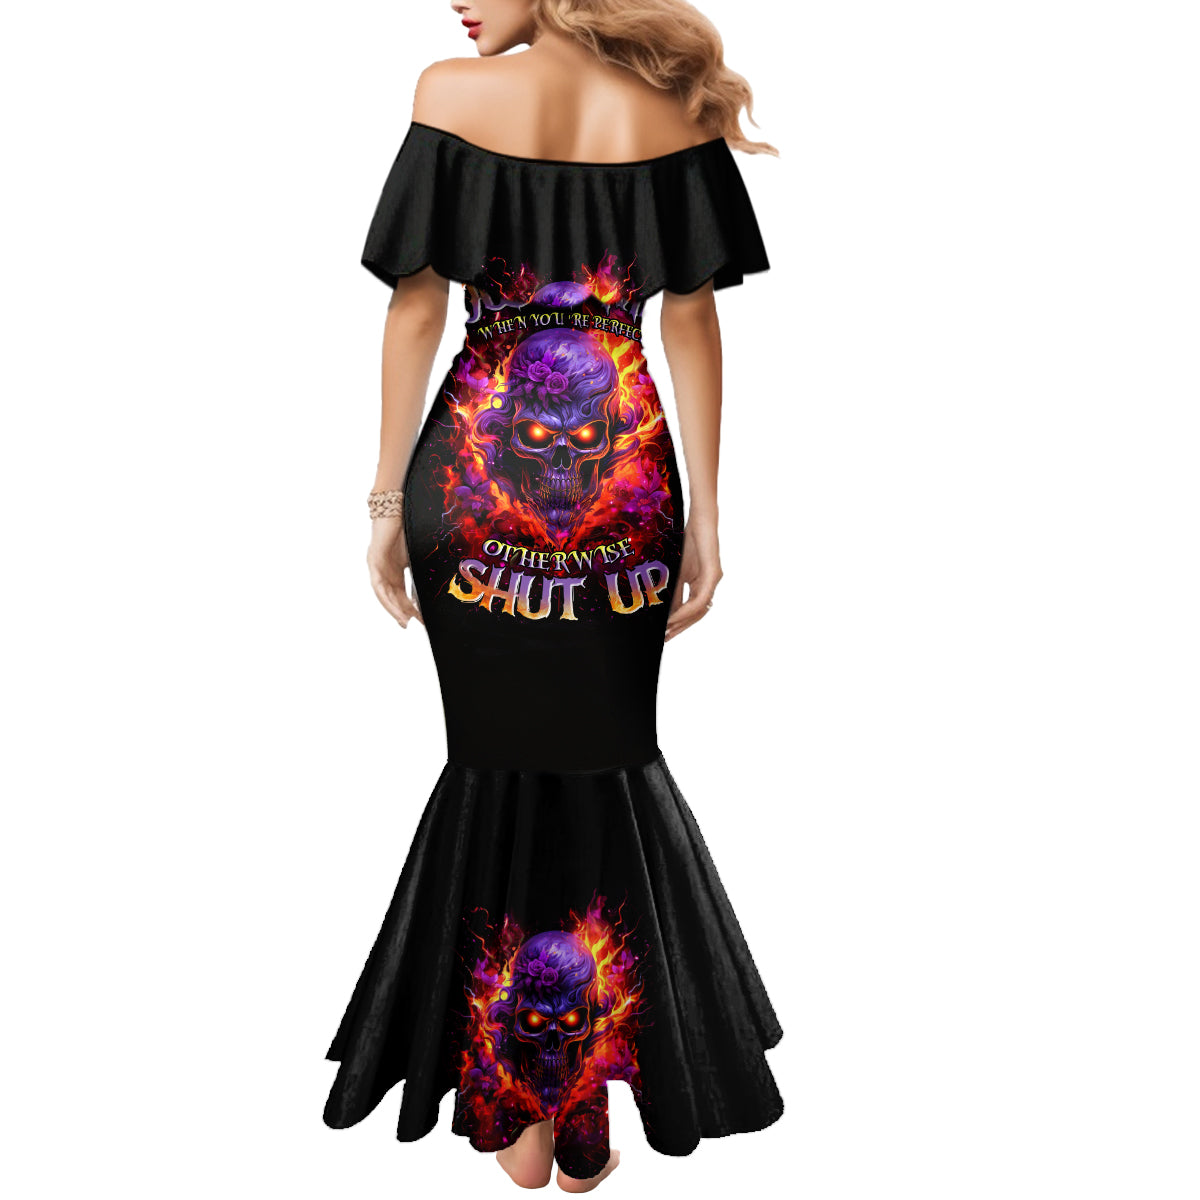 Flame Skull Mermaid Dress Judge Me When You Reperfect Otherwise Shut Up